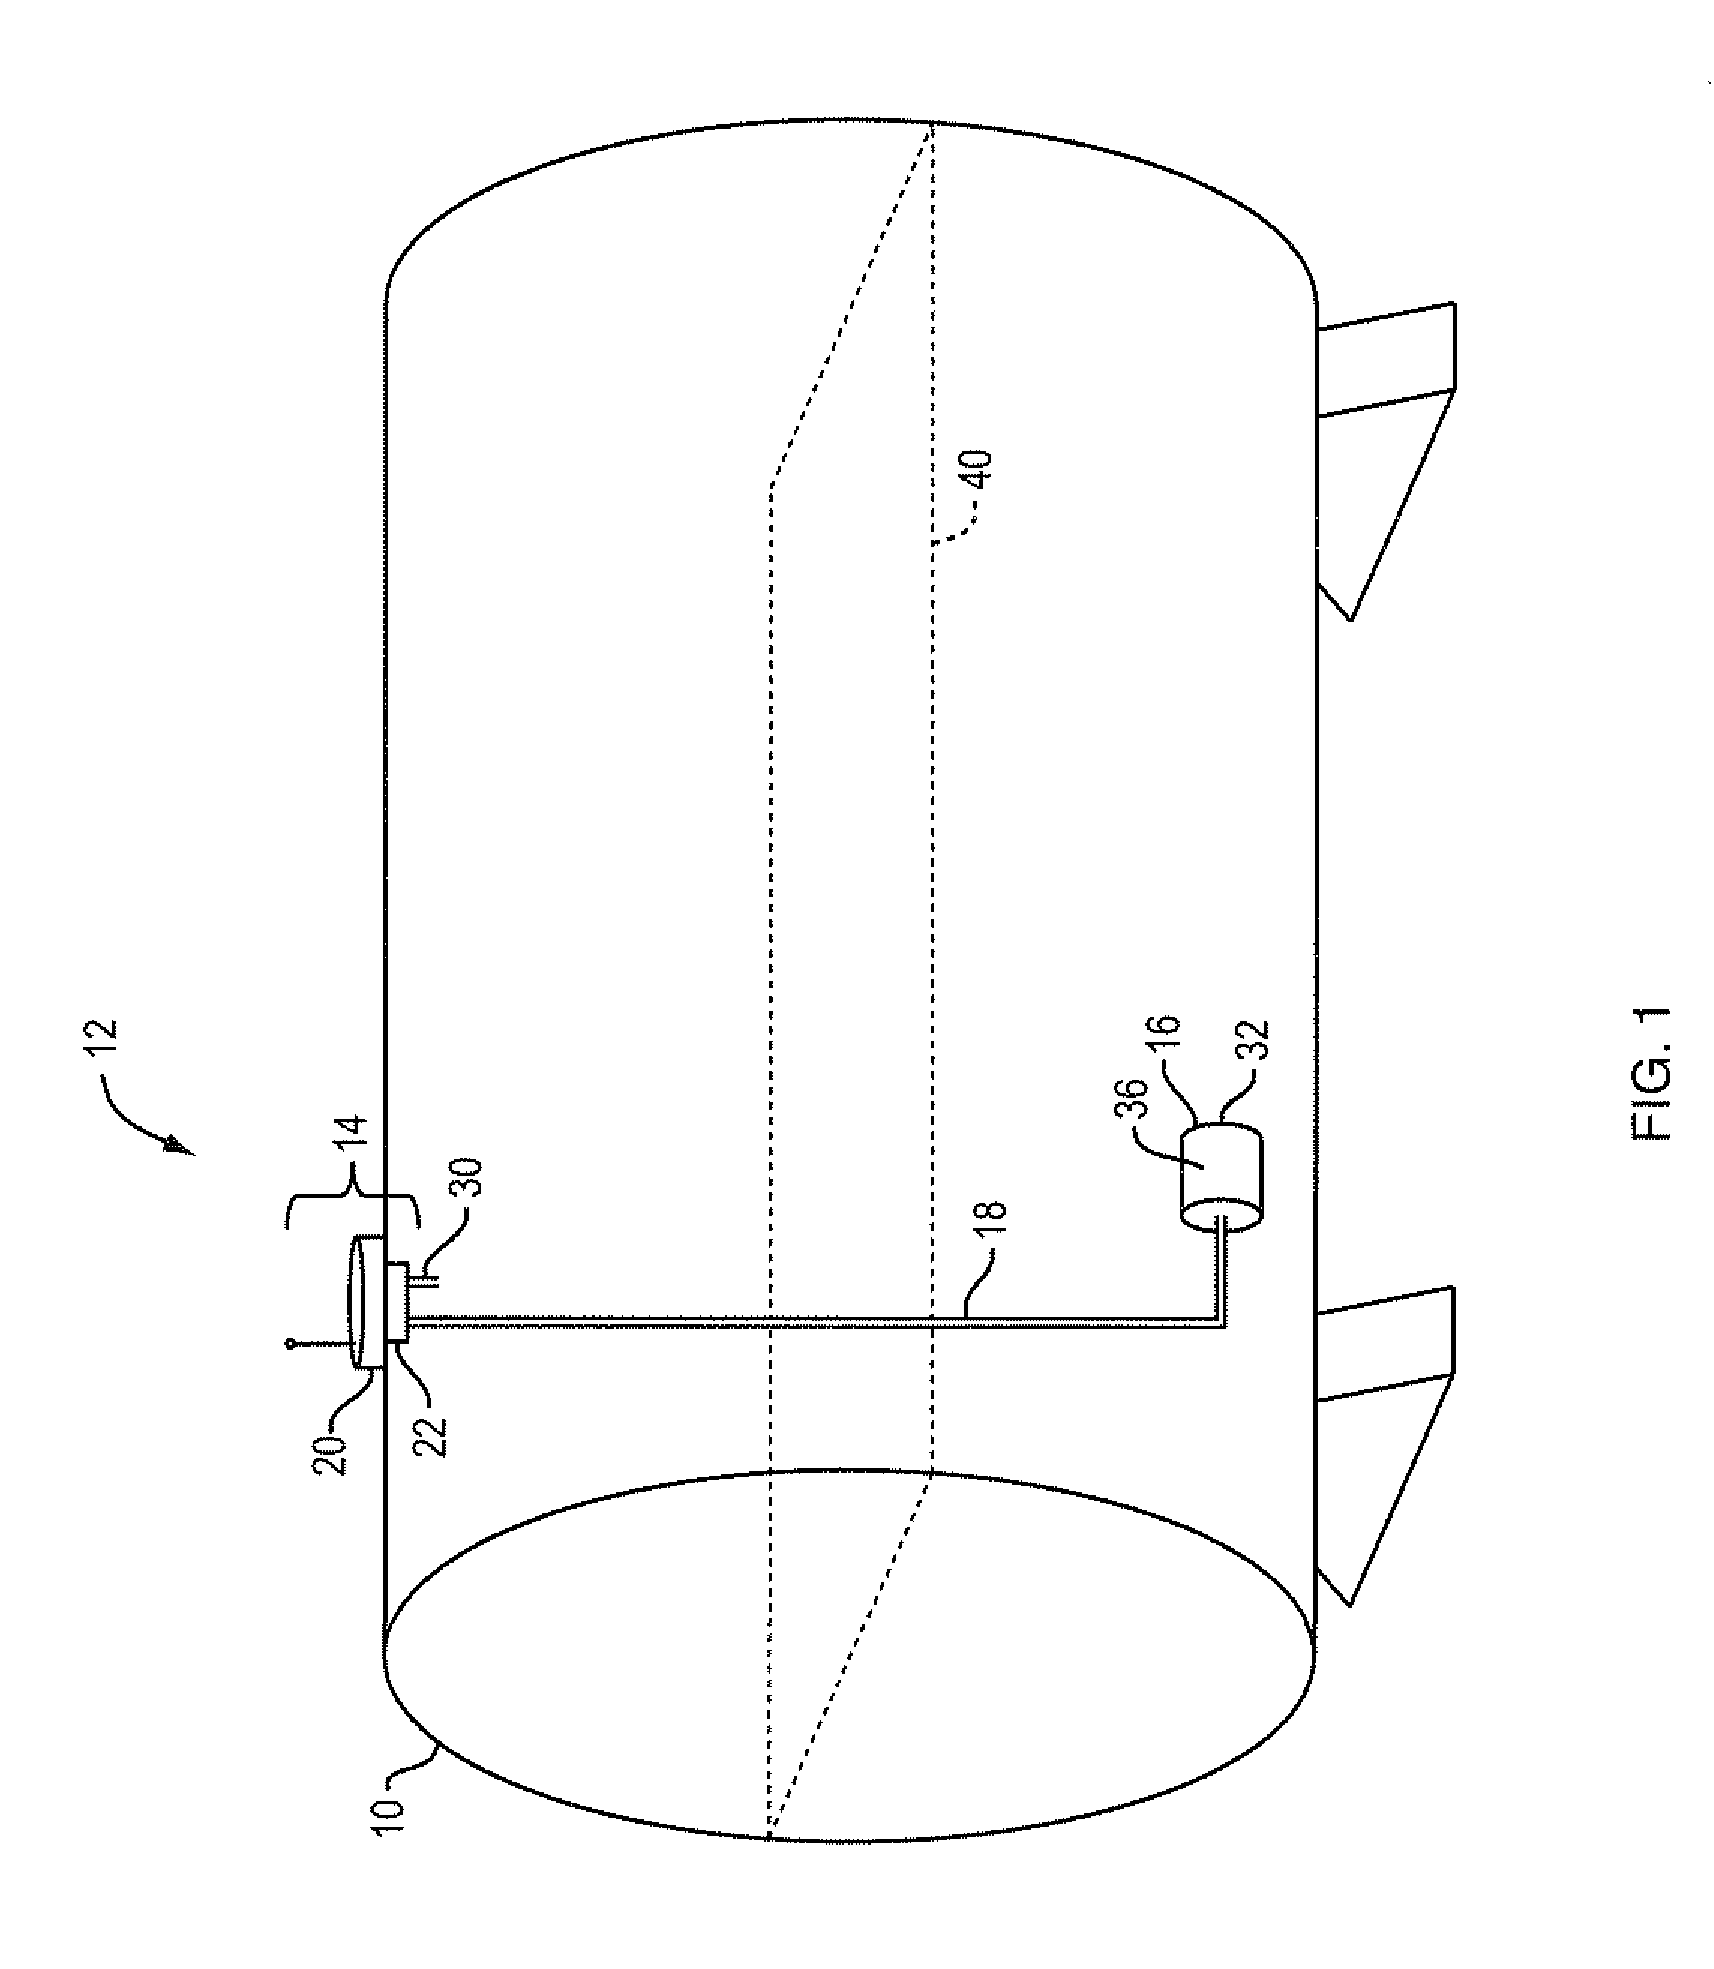 Remote level gauge adapted for liquid fuel tank